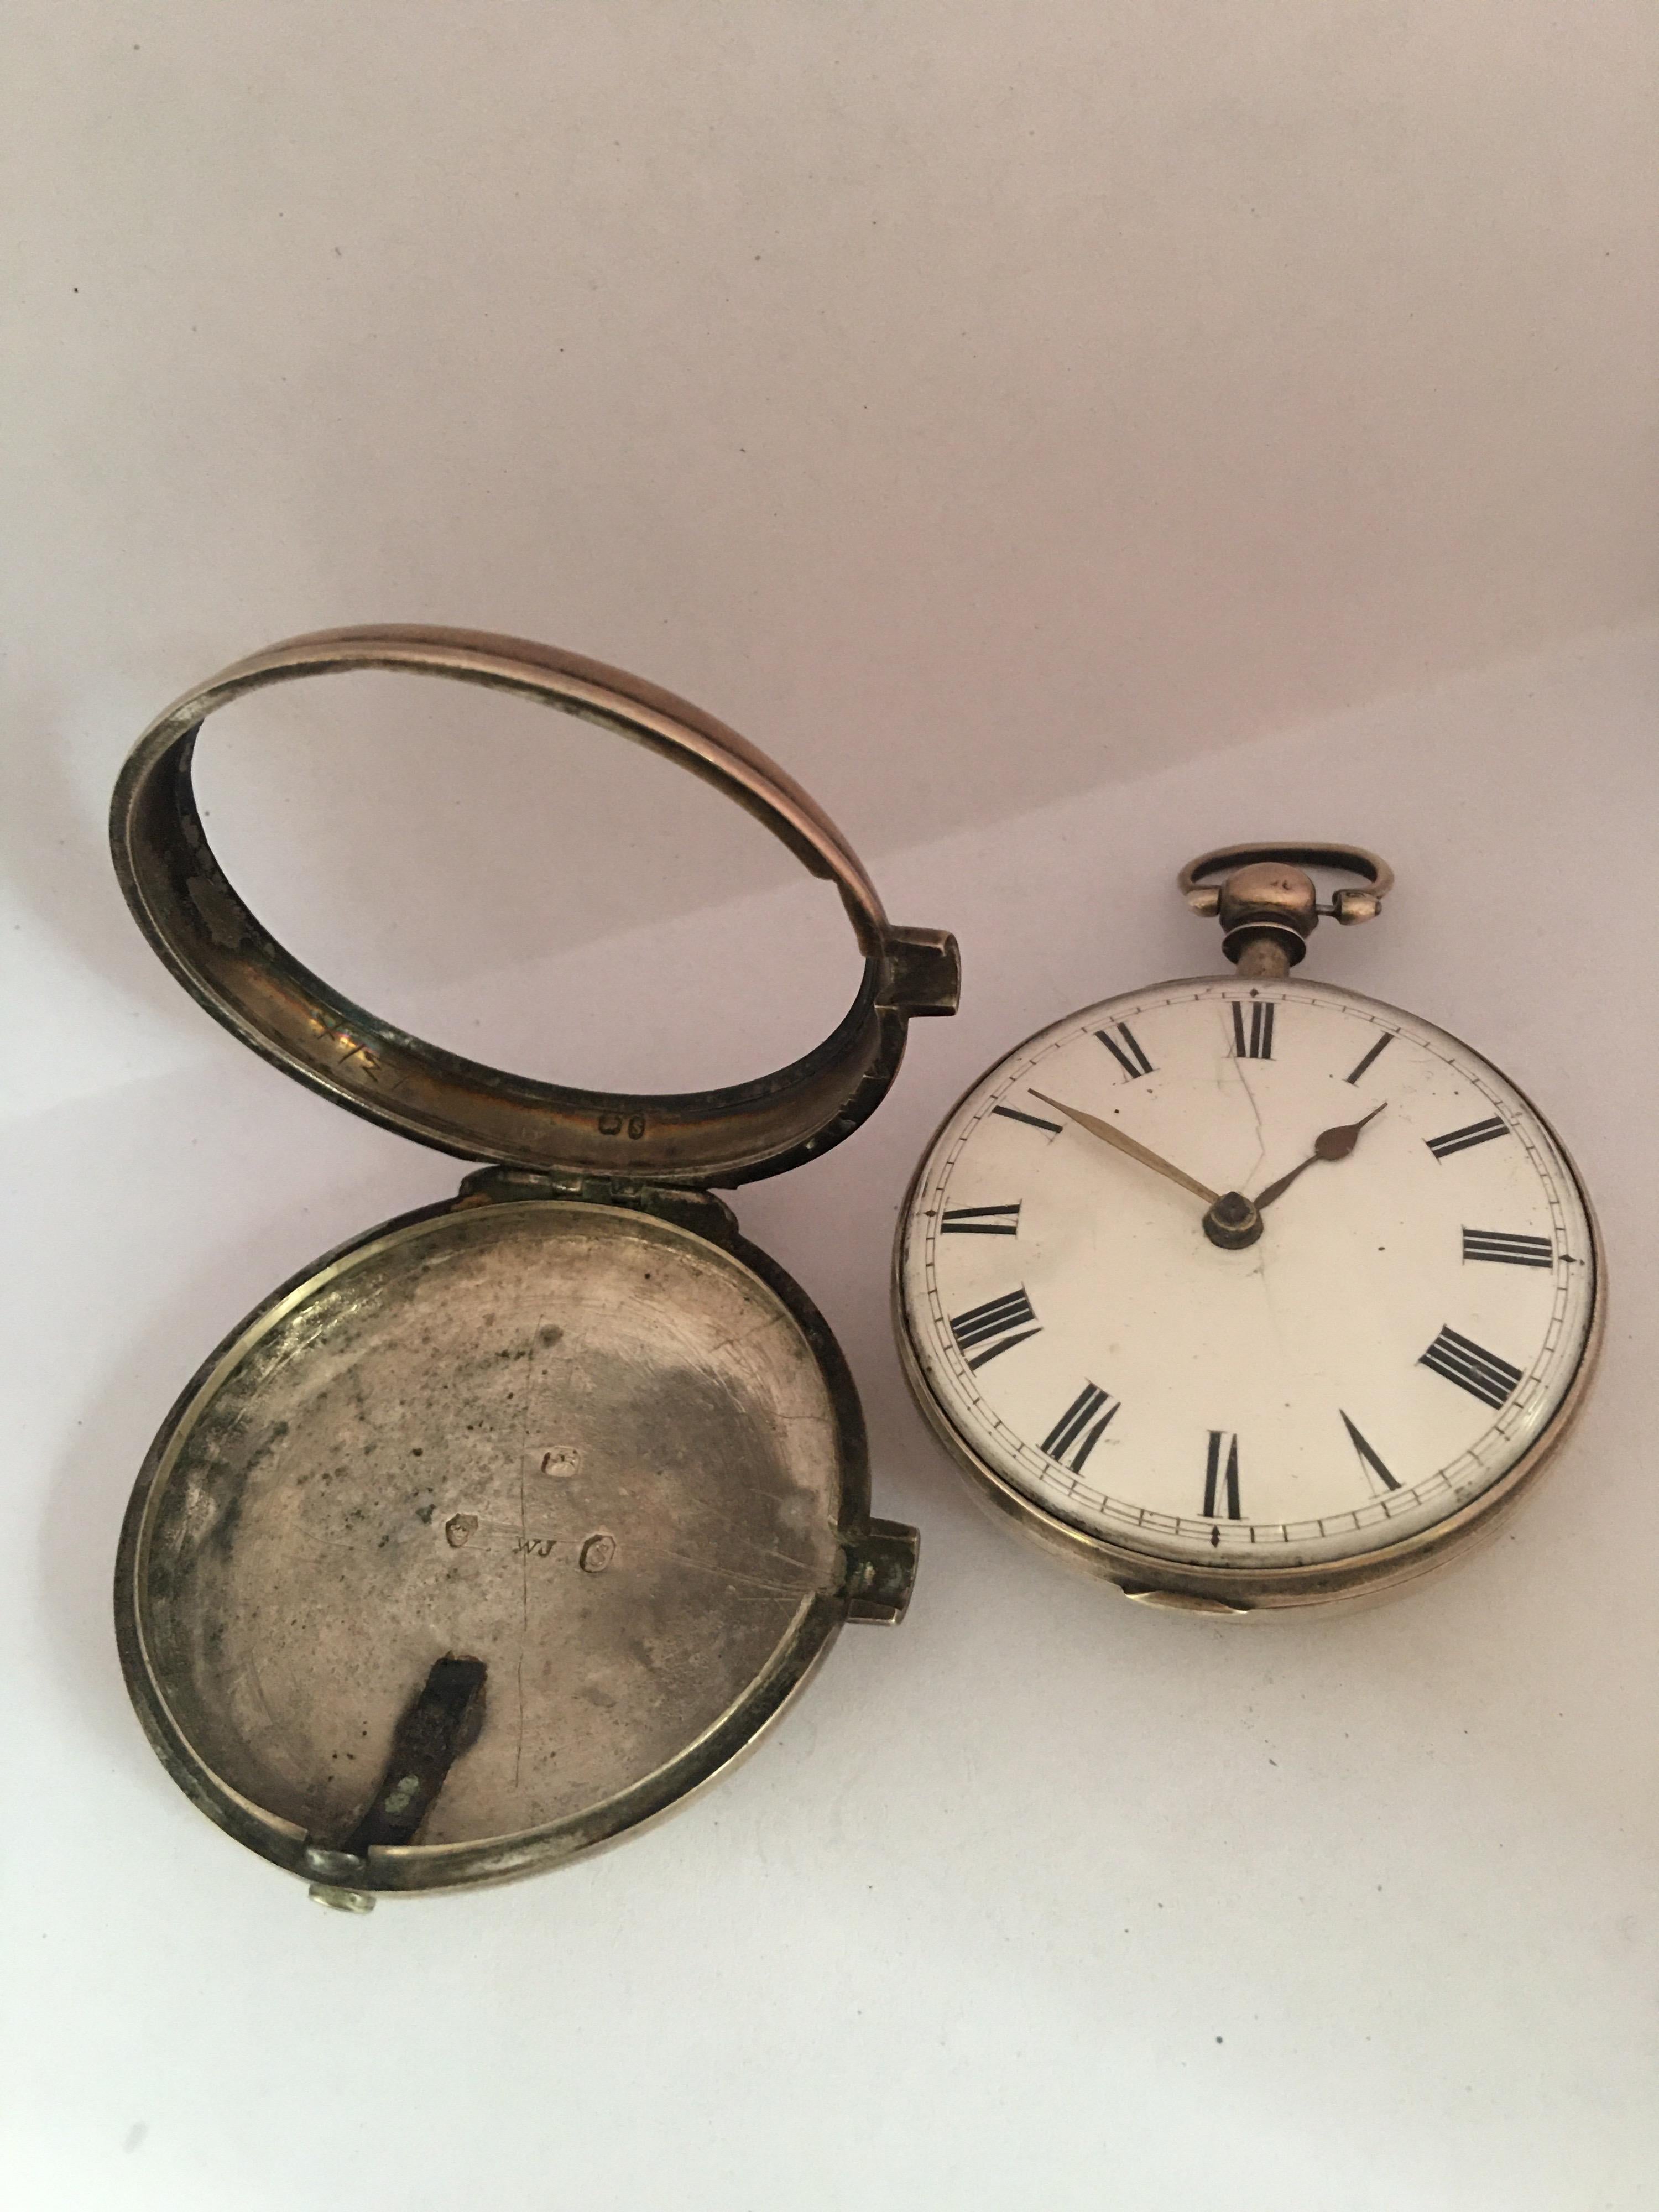 19th century silver pair cased verge pocket watch, the fusee movement signed Henry Fogden, Chichester, no. 4109, with pierced engraved balance cock, flat steel balance and Bosley type regulator, enamel dial with Roman numerals, matching cases, 59mm